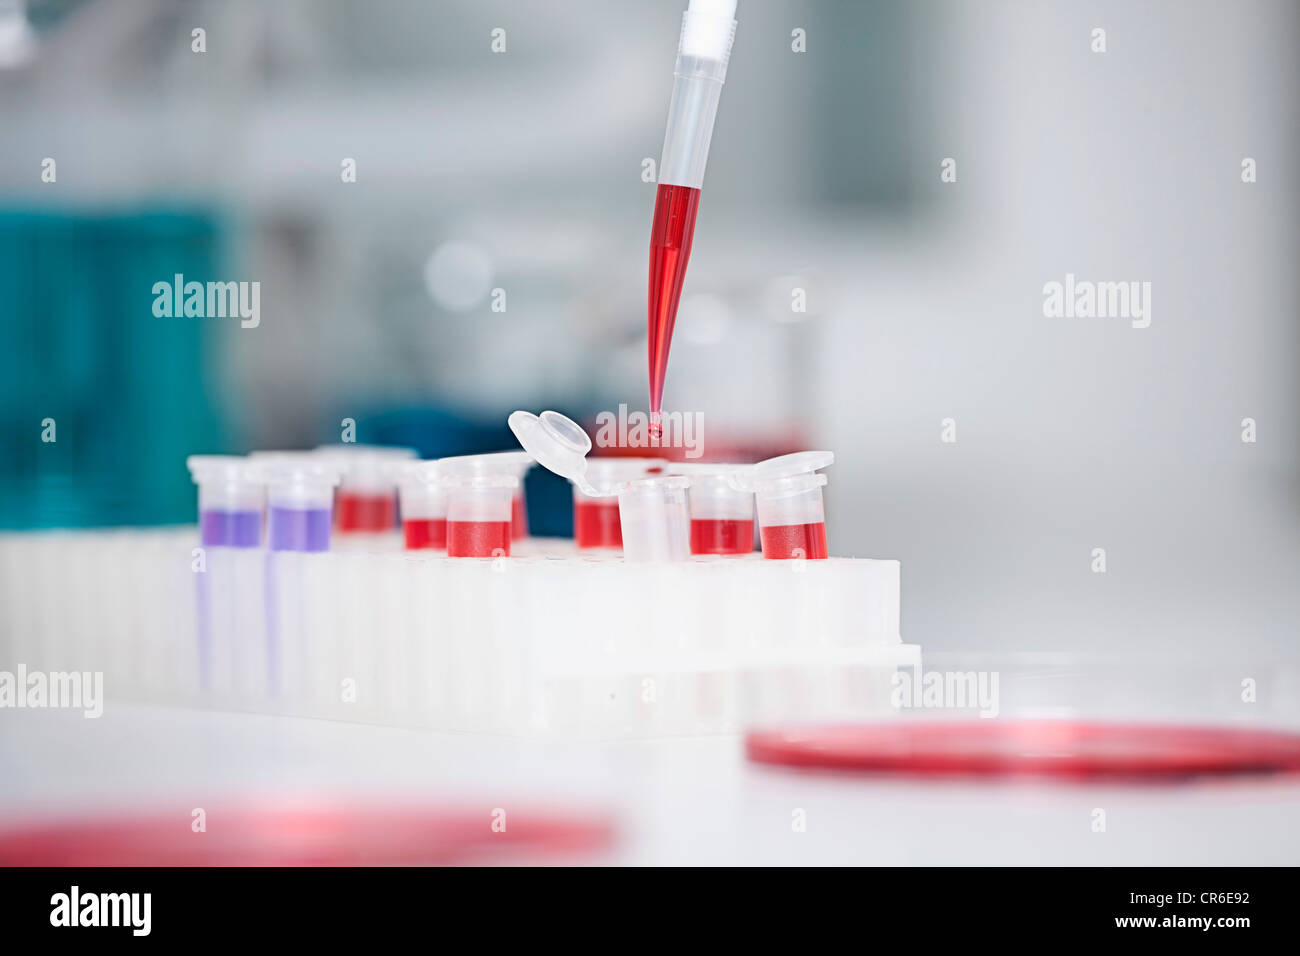 Germany, Bavaria, Munich, Pipette pouring liquid into test tubes for medical research Stock Photo